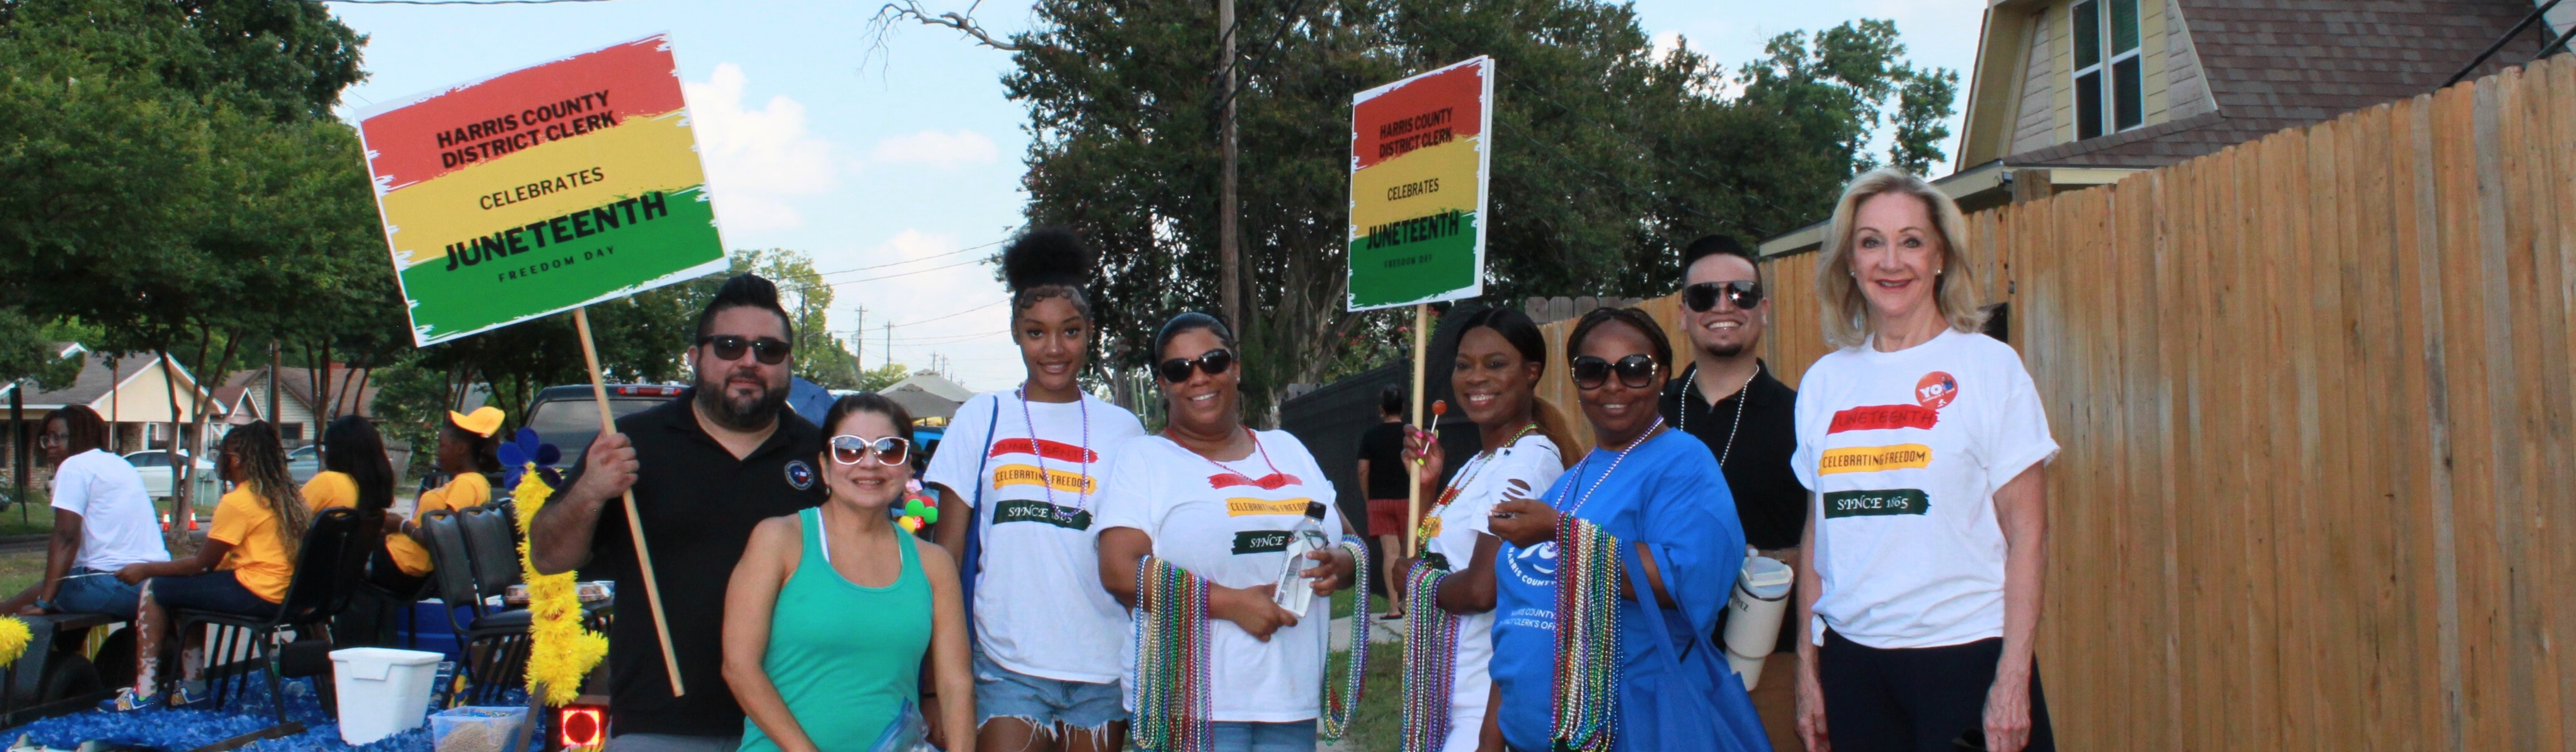 image of District Clerk Marilyn Burgess and team at Juneteenth parade.